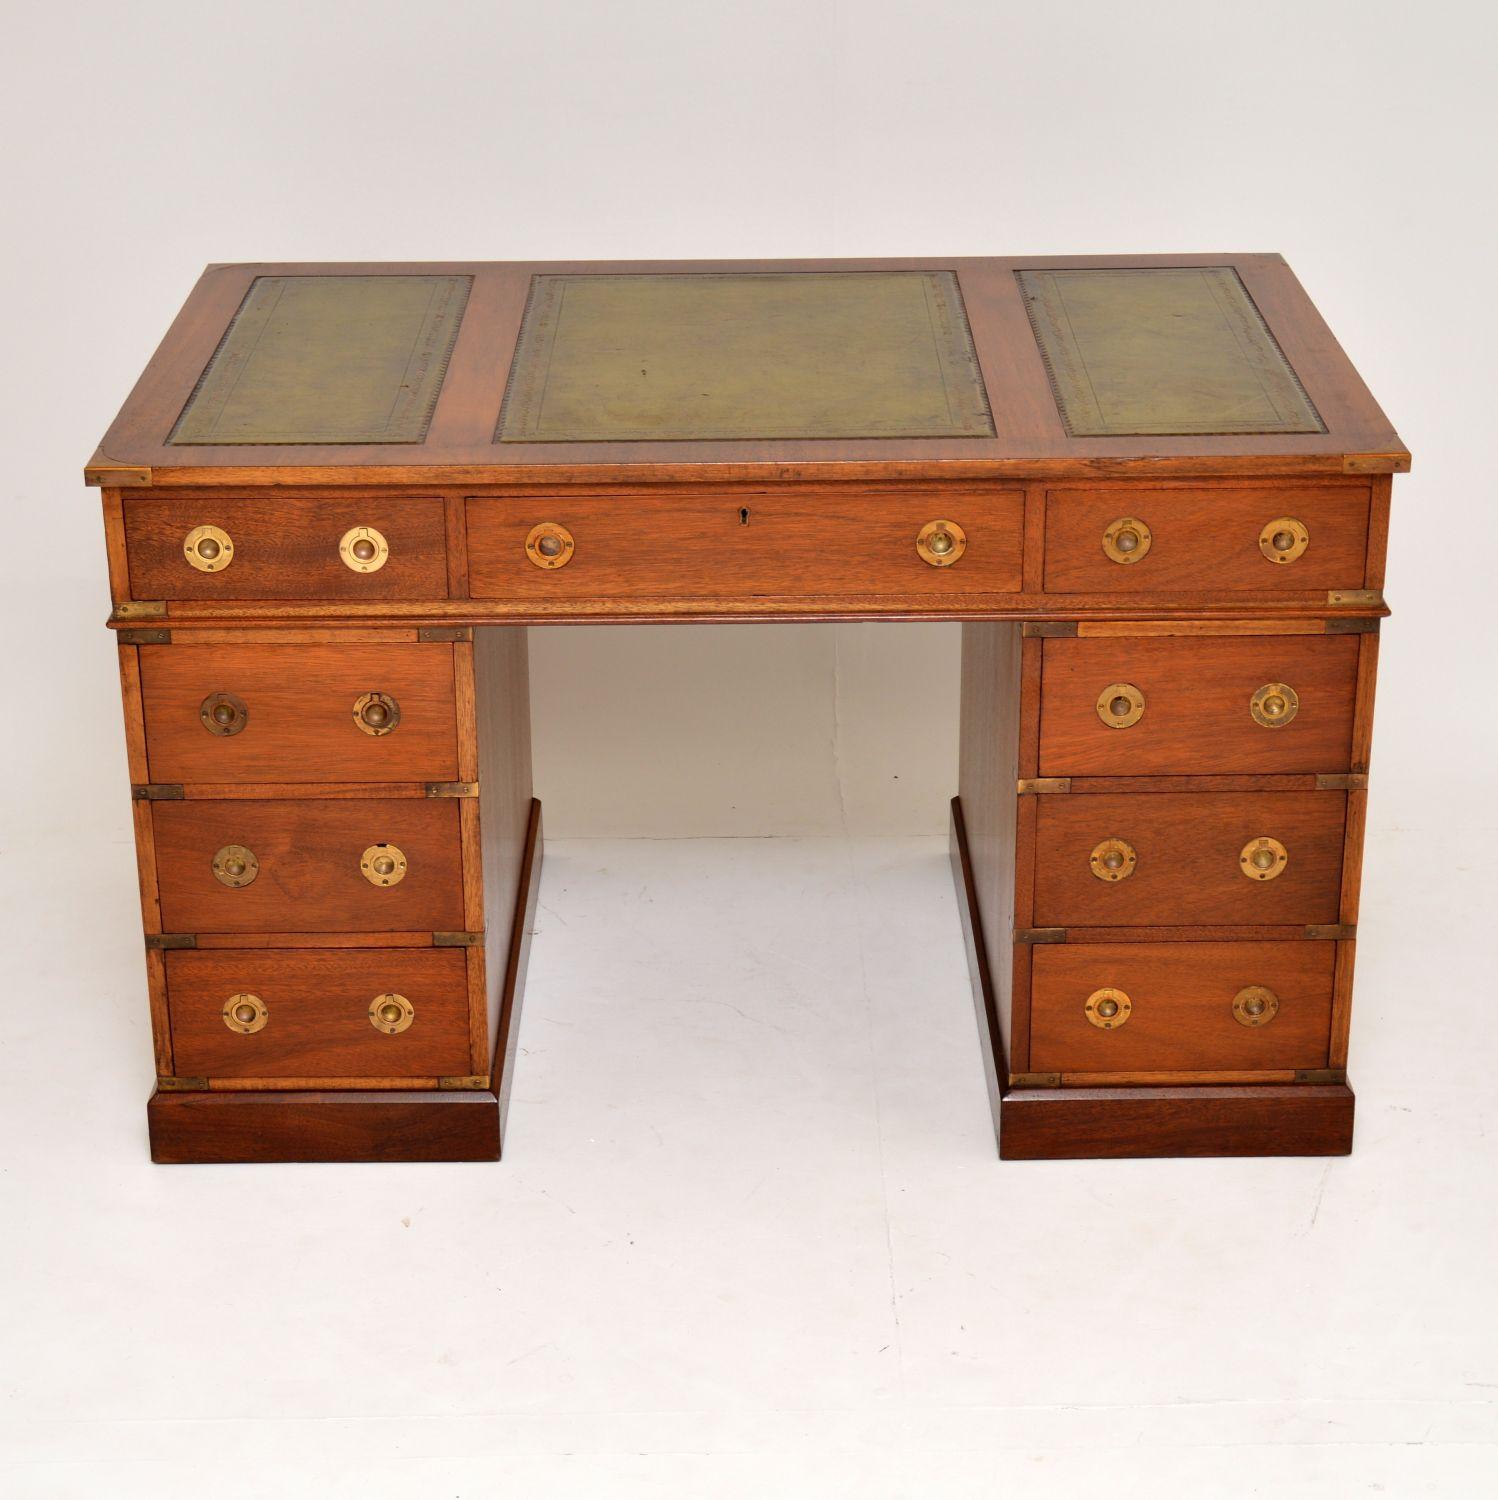 Antique Military Campaign style mahogany pedestal desk in good original condition & with lots of character.

It has a three partitioned tooled leather writing surface, brass corner fittings & inset brass naval handles on the drawers. The back is